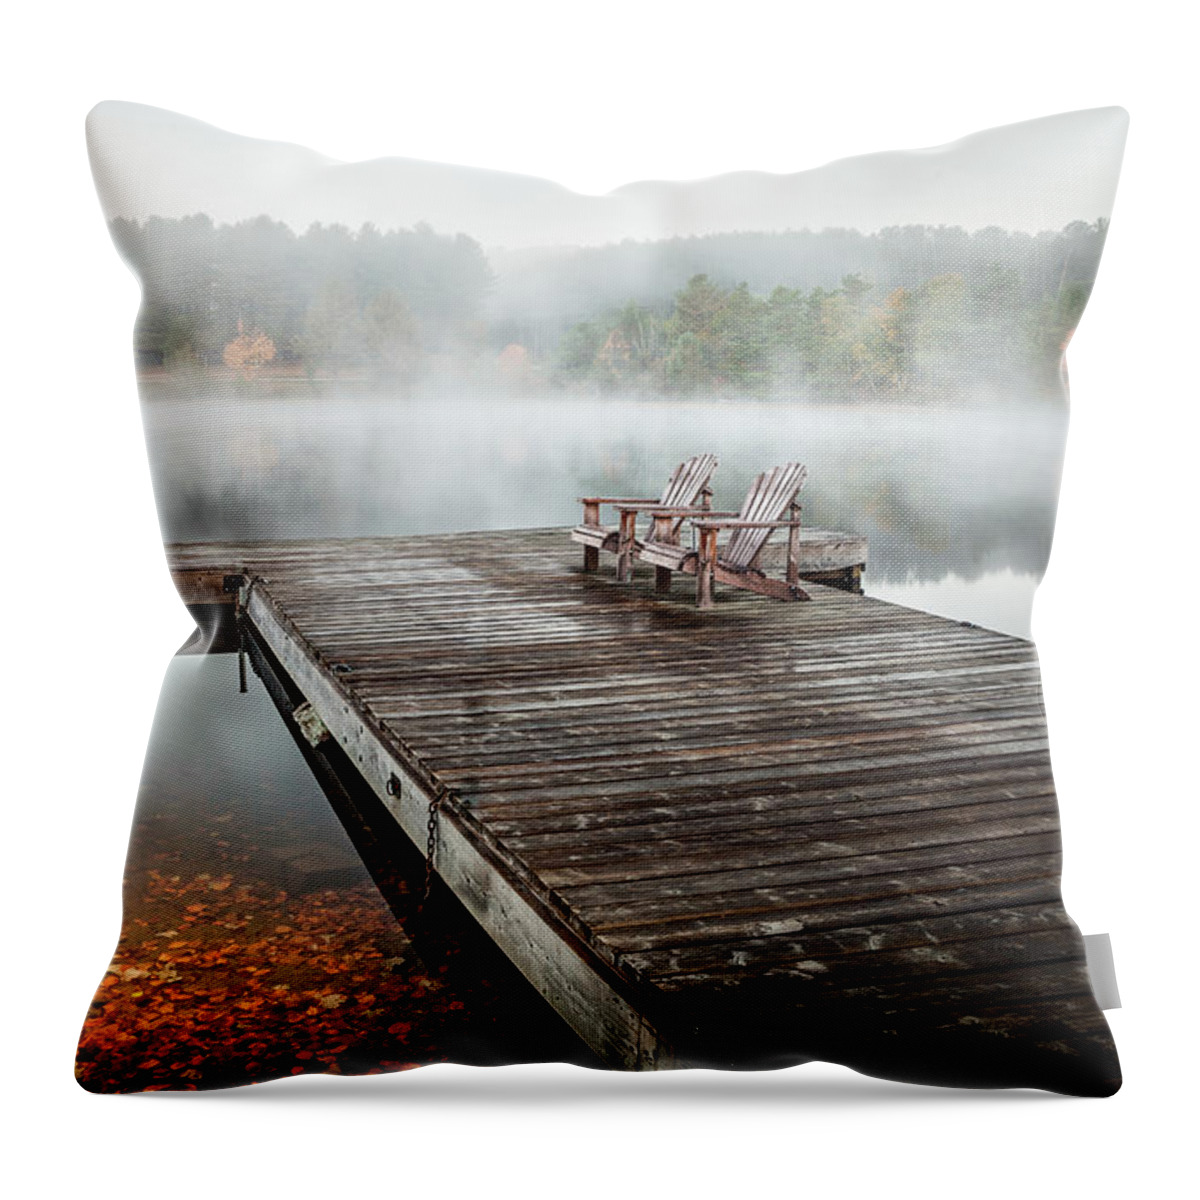 Algonquin Throw Pillow featuring the photograph Quiet Time by Manpreet Sokhi